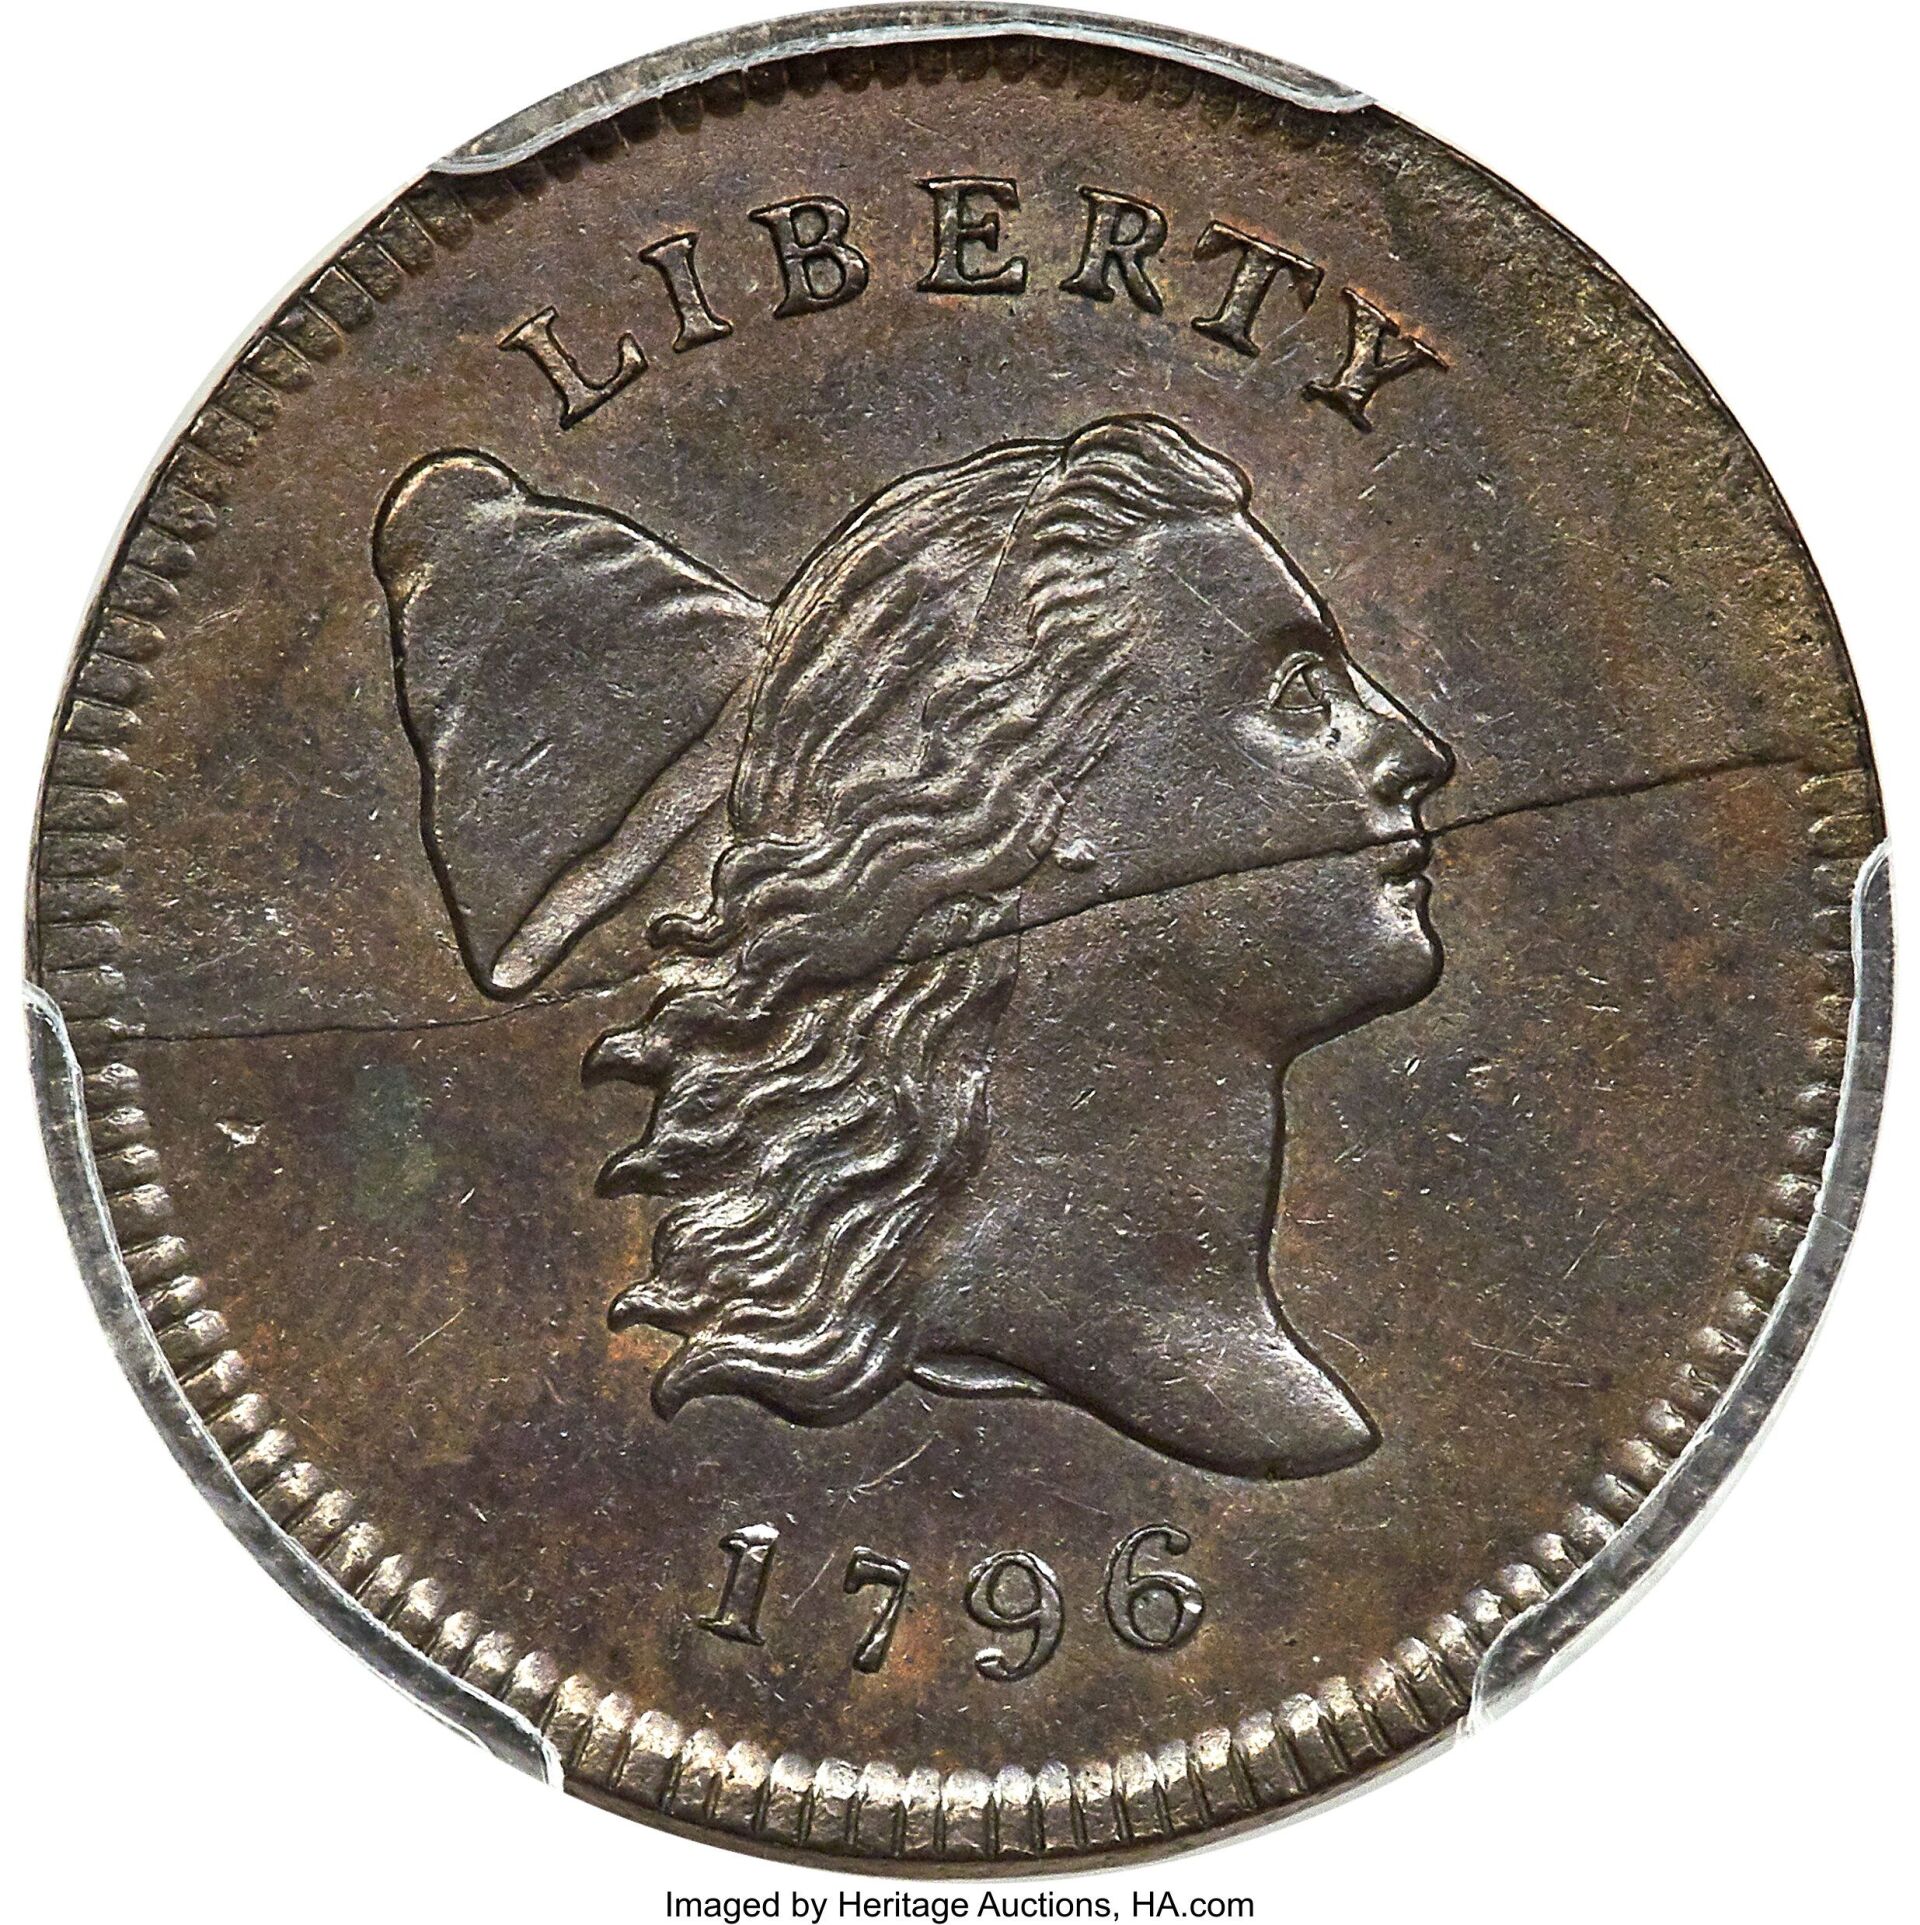 1796 No Pole Half Cent.  Imaged by Heritage Auctions, HA.com